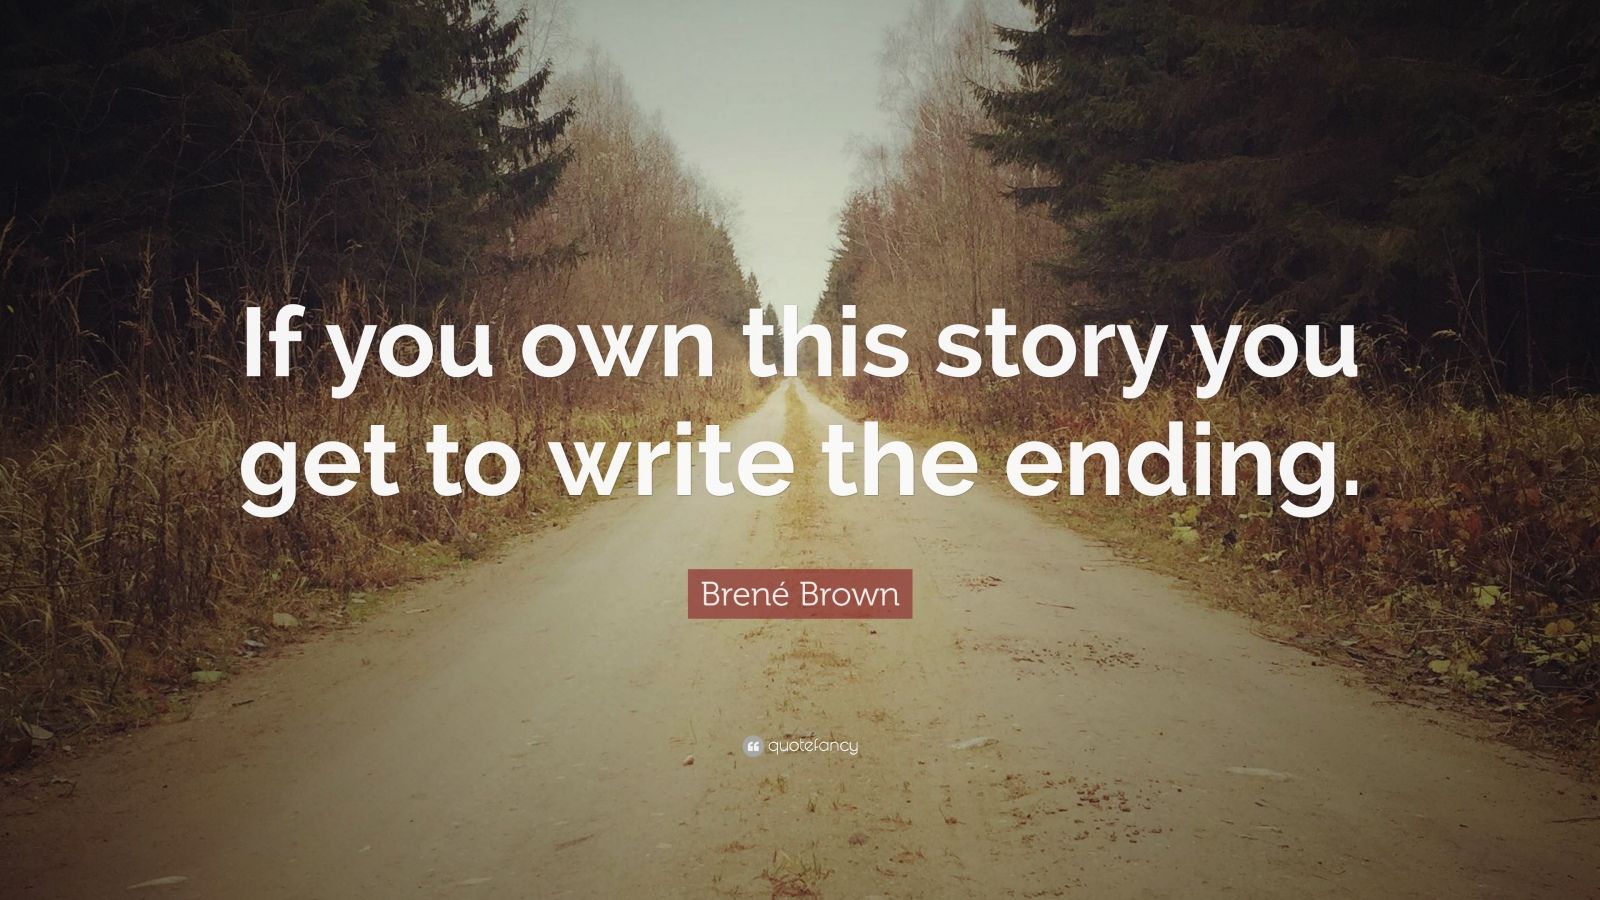 Brené Brown Quote: “If you own this story you get to write the ending.”